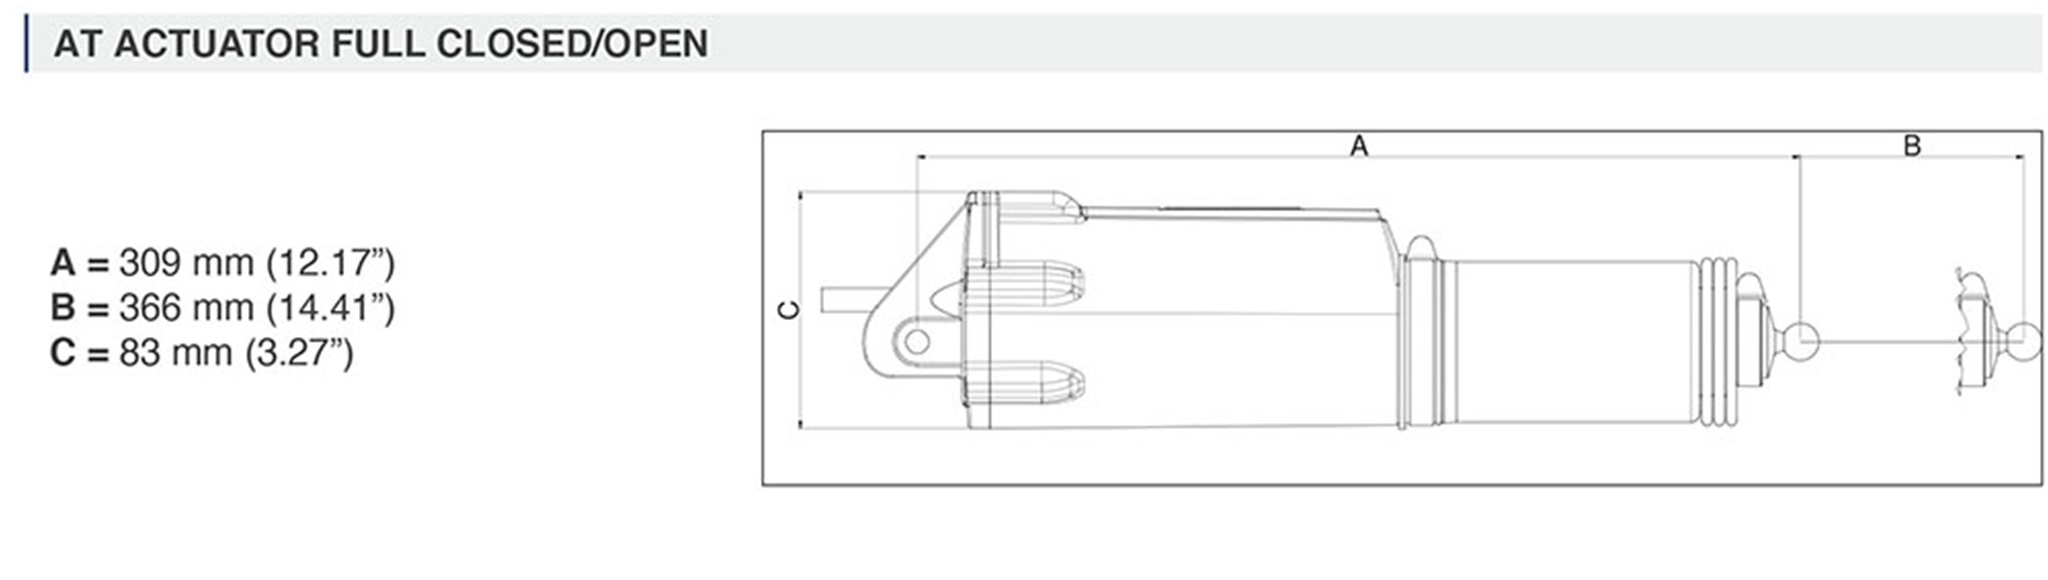 AT12 Standard Trim Tab Actuator and Brackets Specifications